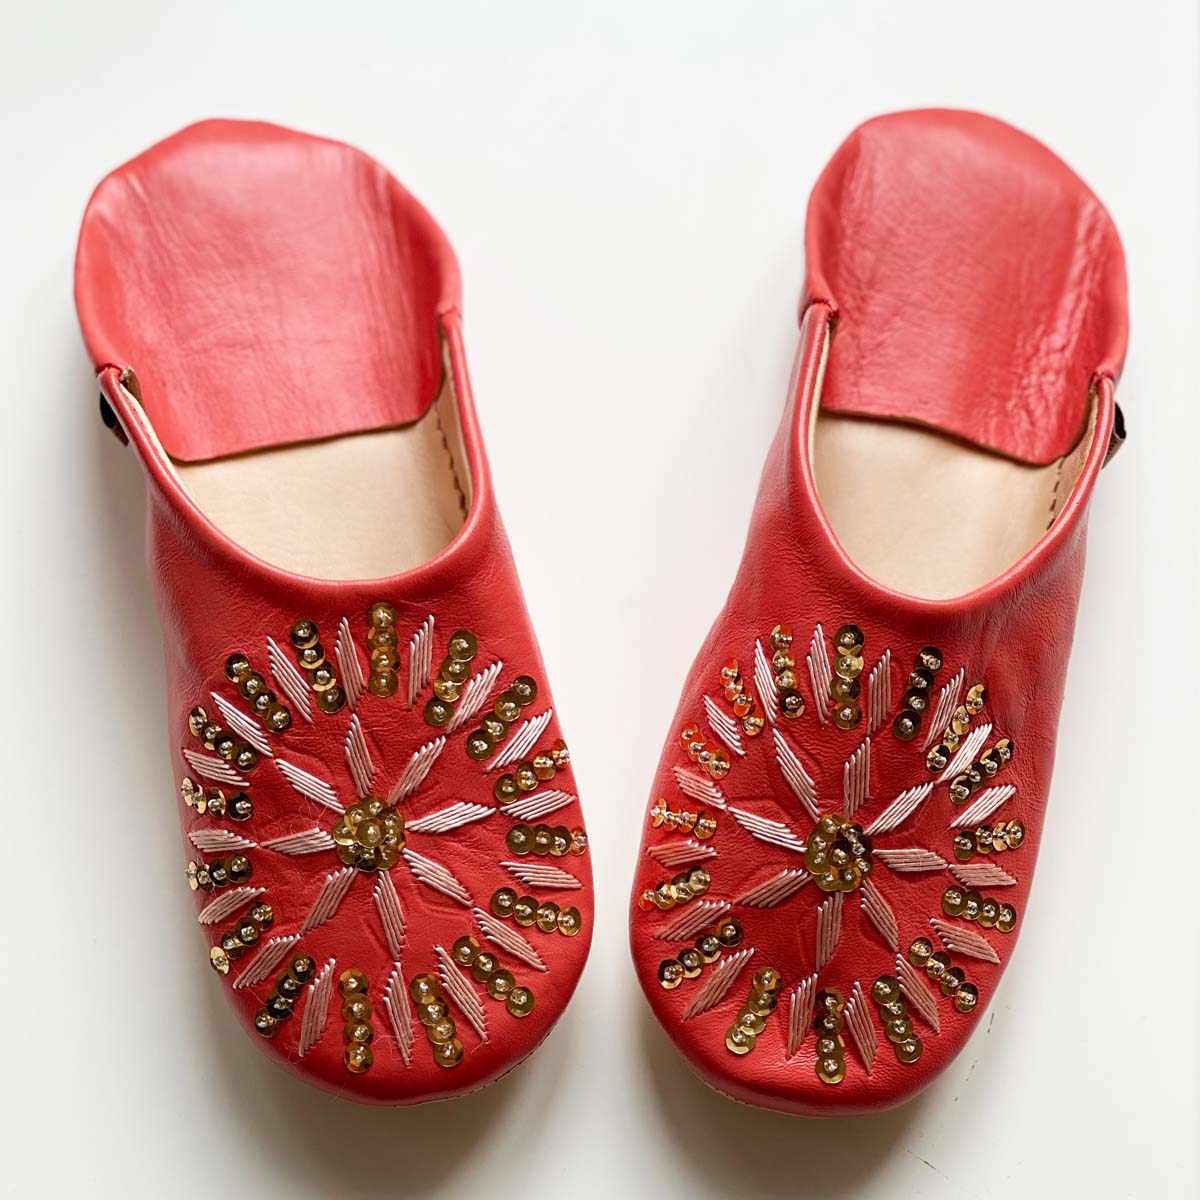 Babouche Spangle Rose// dear Morocco original leather slippers